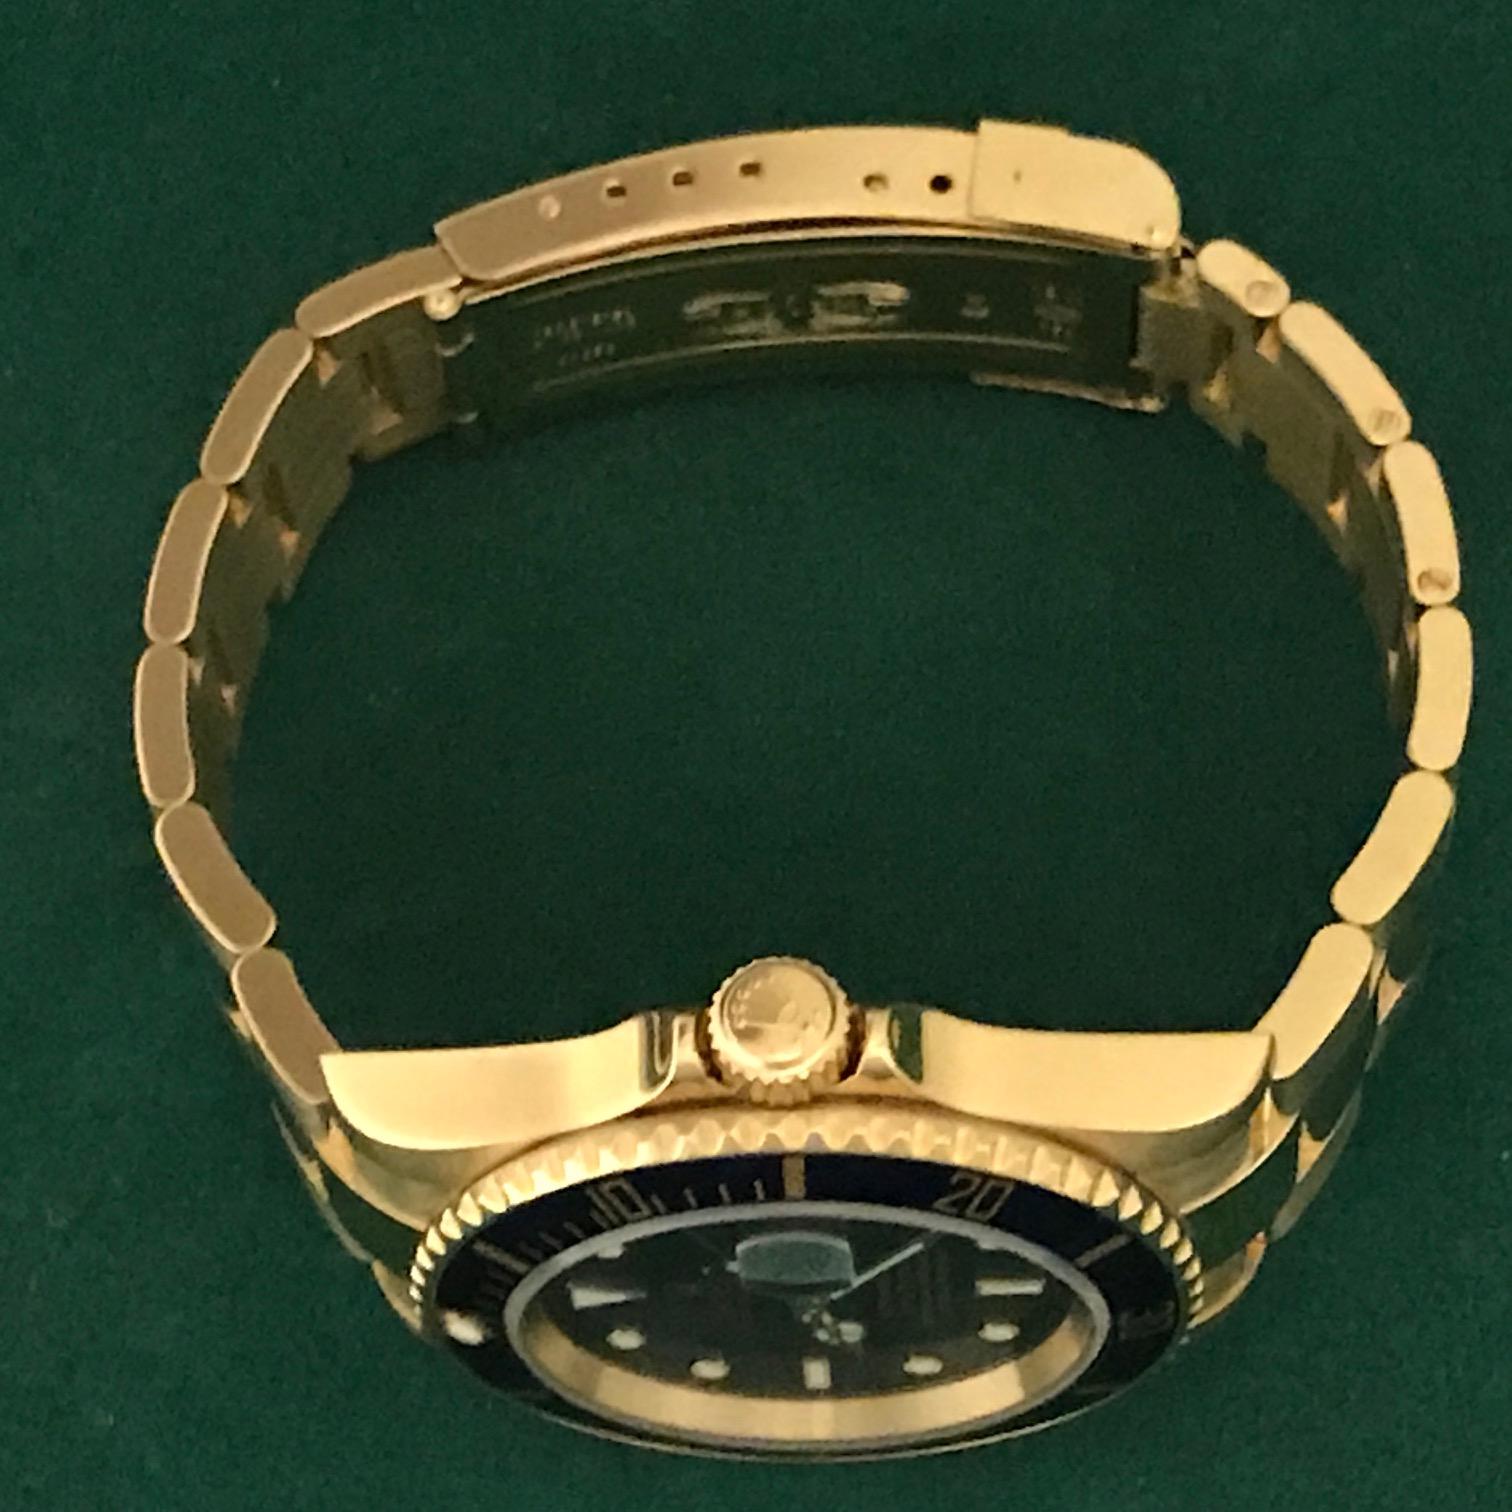 Contemporary Rolex Yellow Gold Submariner Oyster Perpetual Date Automatic Wristwatch